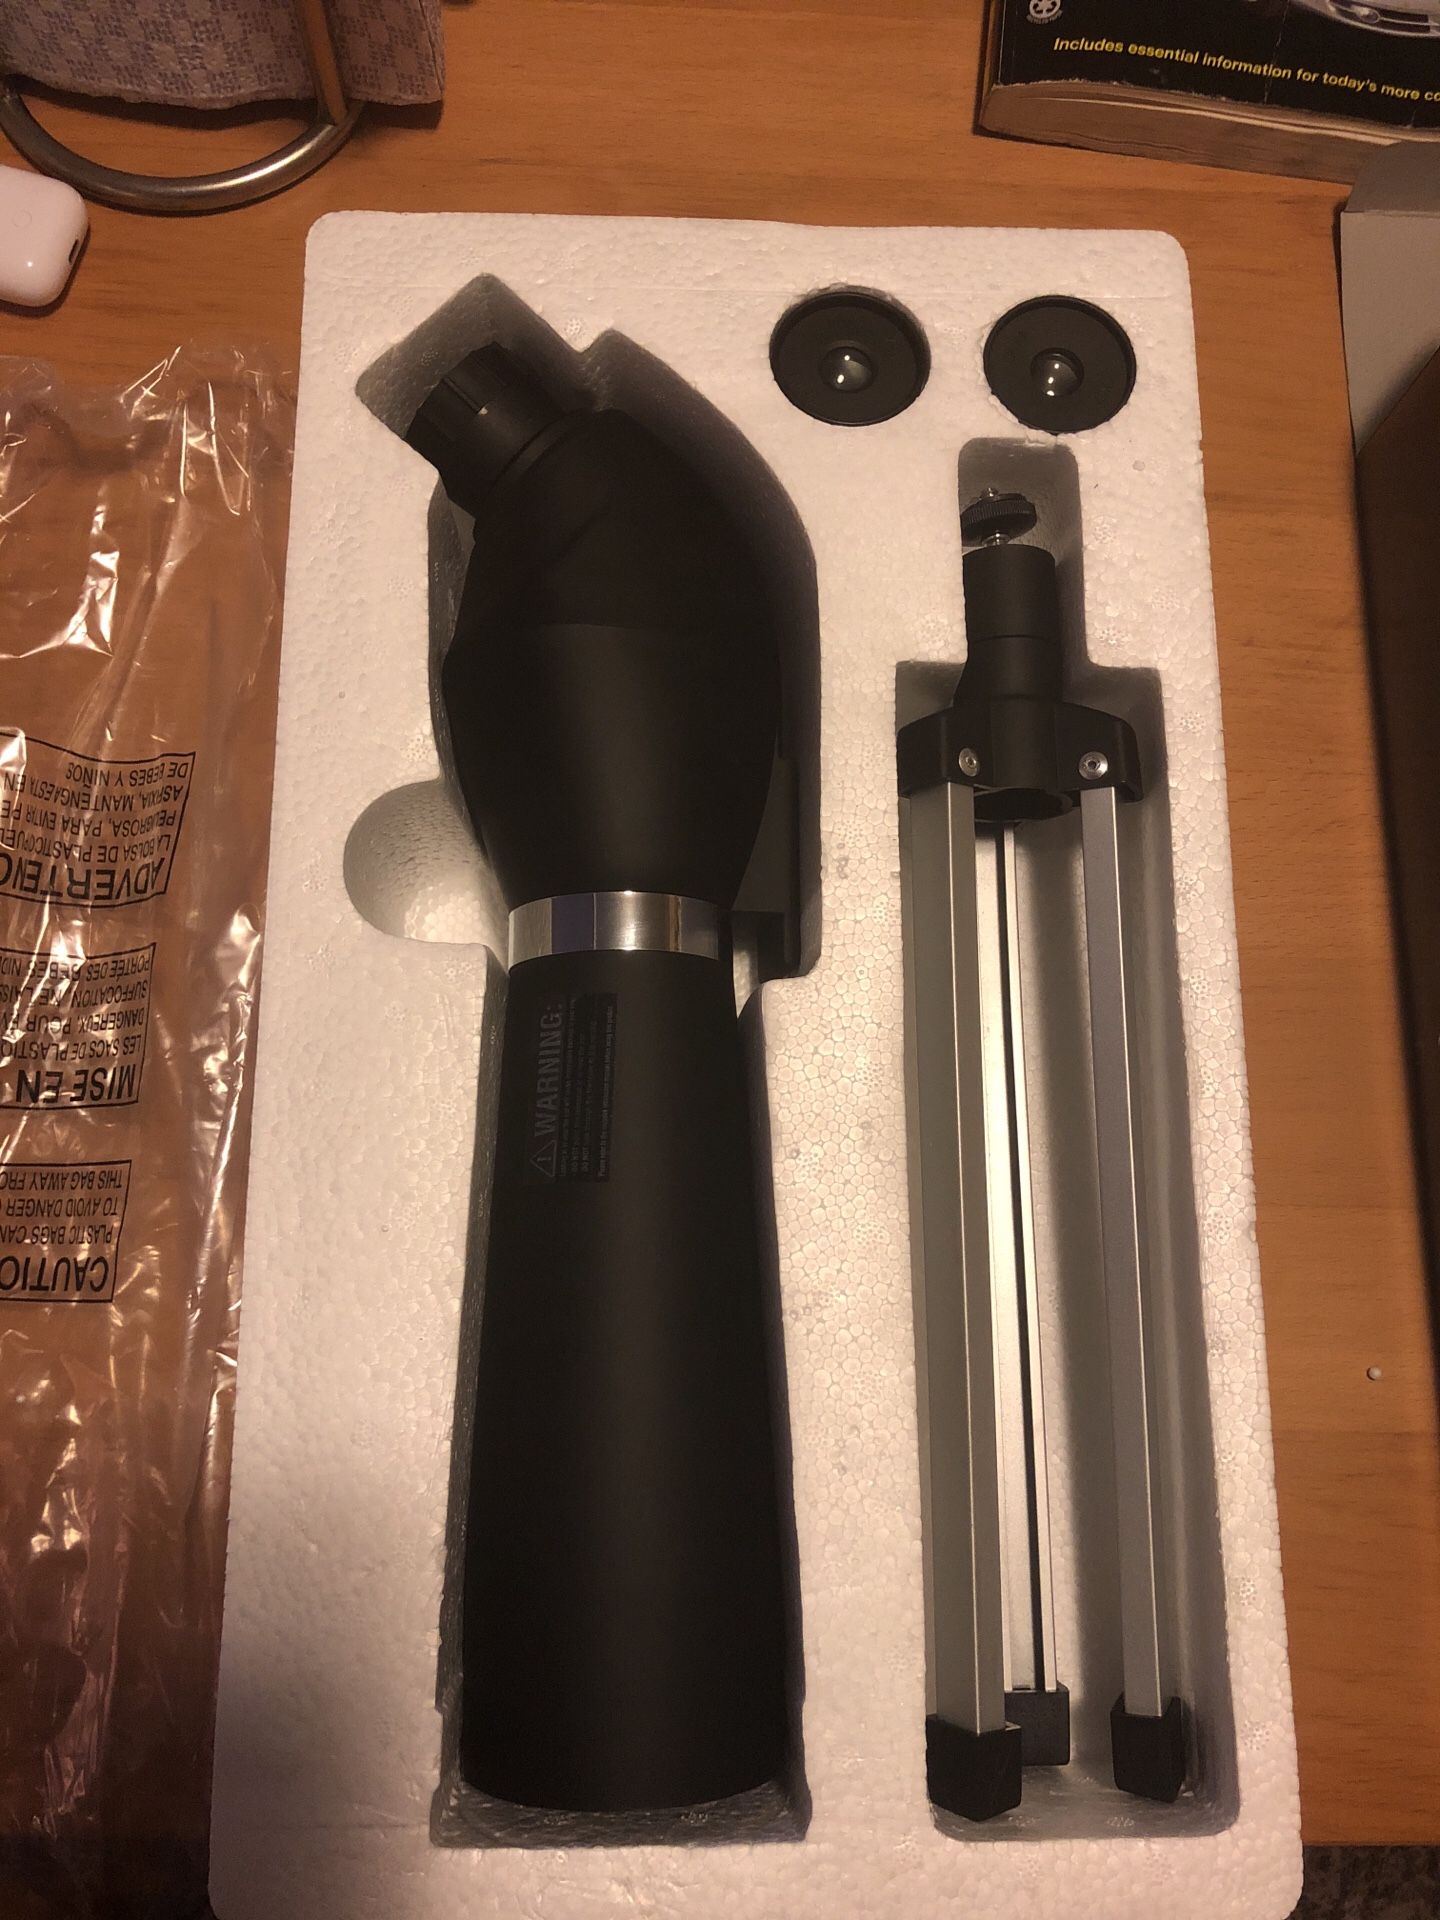 Scope 25X magnification NEW